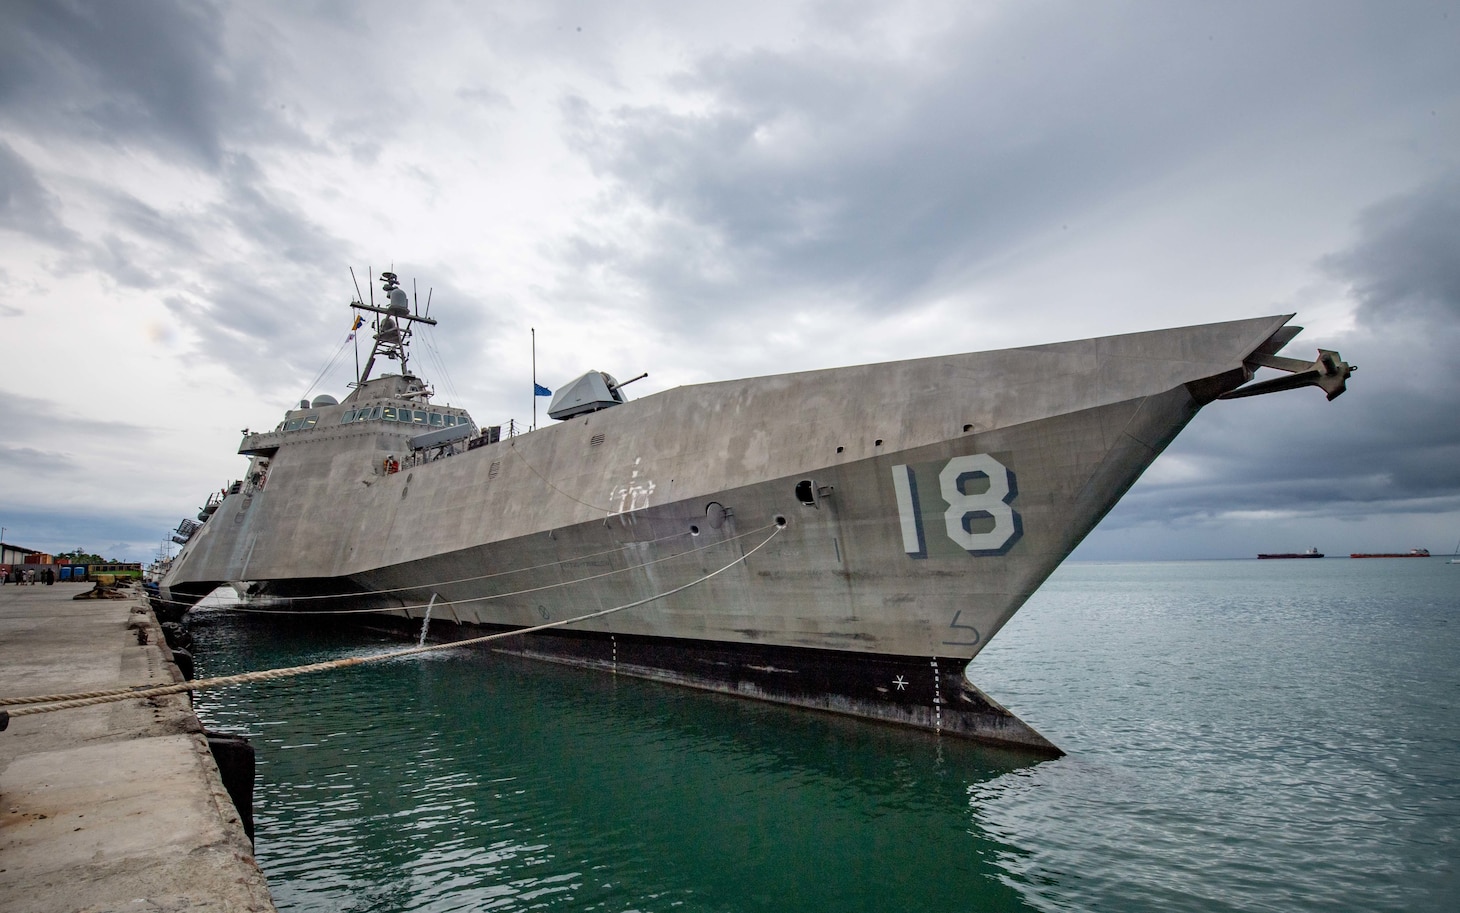 DILI, Timor-Leste (Dec. 8, 2021) Independence-variant littoral combat ship USS Charleston (LCS 18), moored pier side during a port visit to Dili, Timor-Leste. Charleston, part of Destroyer Squadron (DESRON) 7, is on a rotational deployment in the U.S. 7th Fleet area of operation to enhance interoperability with partners and serve as a ready-response force in support of a free and open Indo-Pacific region. (U.S. Navy photo by Mass Communication Specialist 2nd Class Ryan M. Breeden)